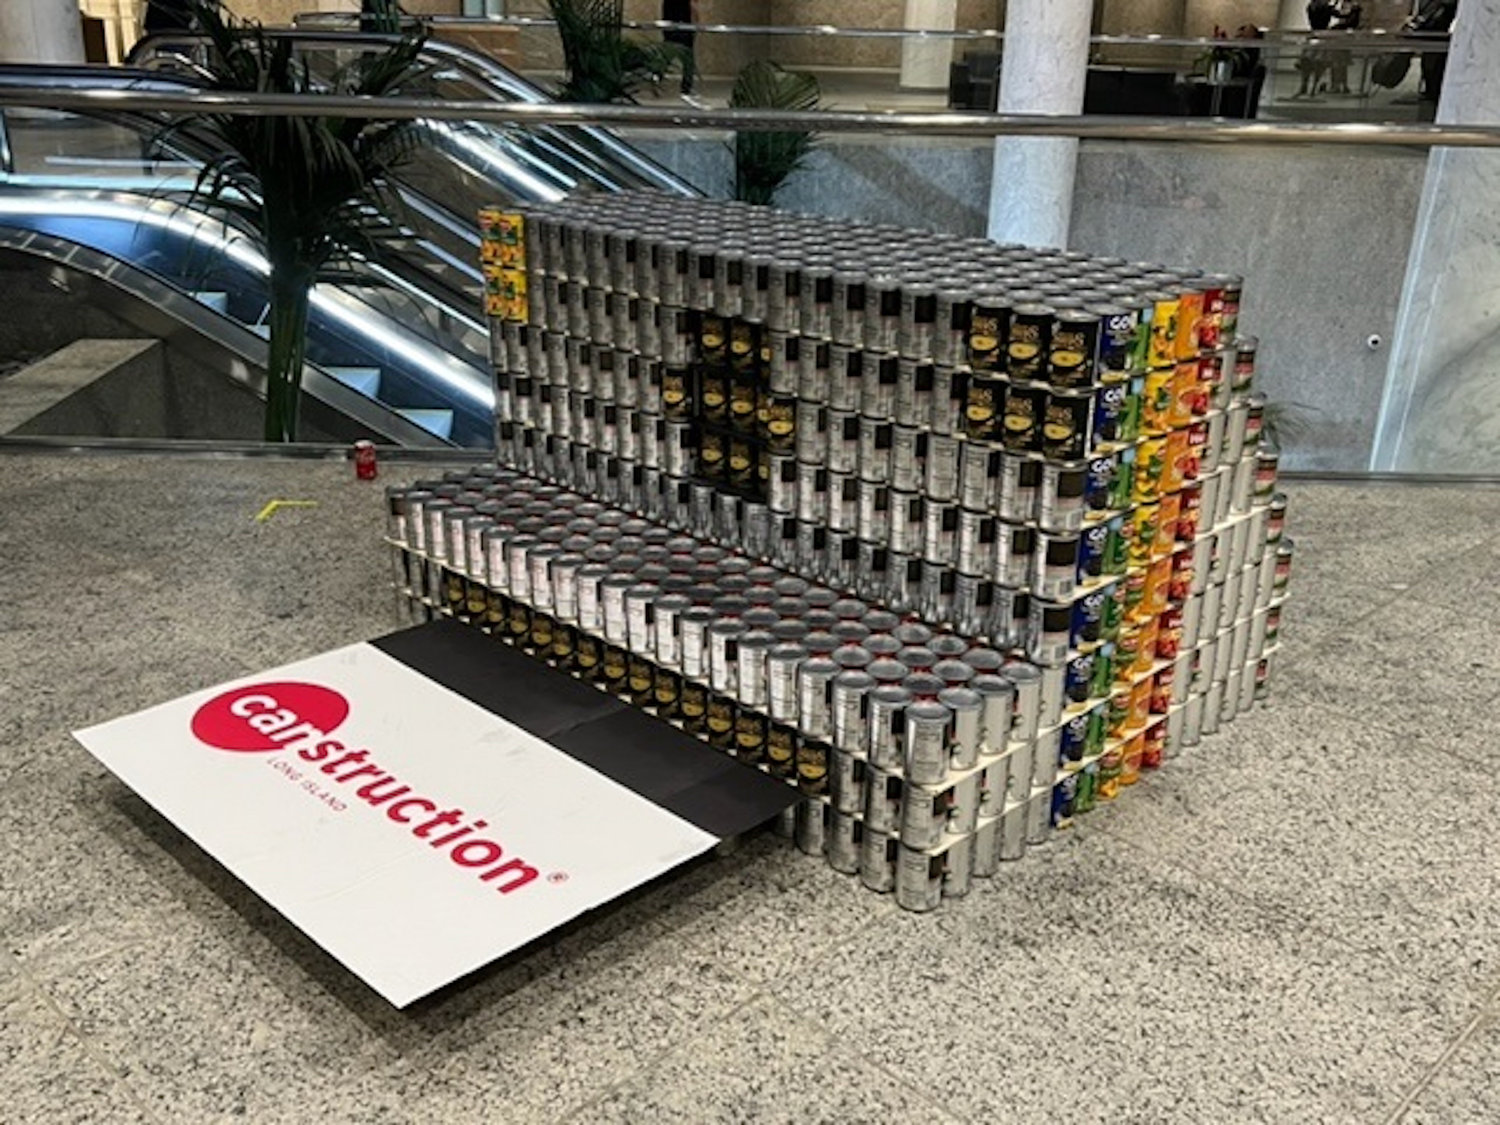 A close-up look at the award-winning sculpture of a Polaroid camera created by the East Rockaway High School team at the Canstruction Long Island competition.